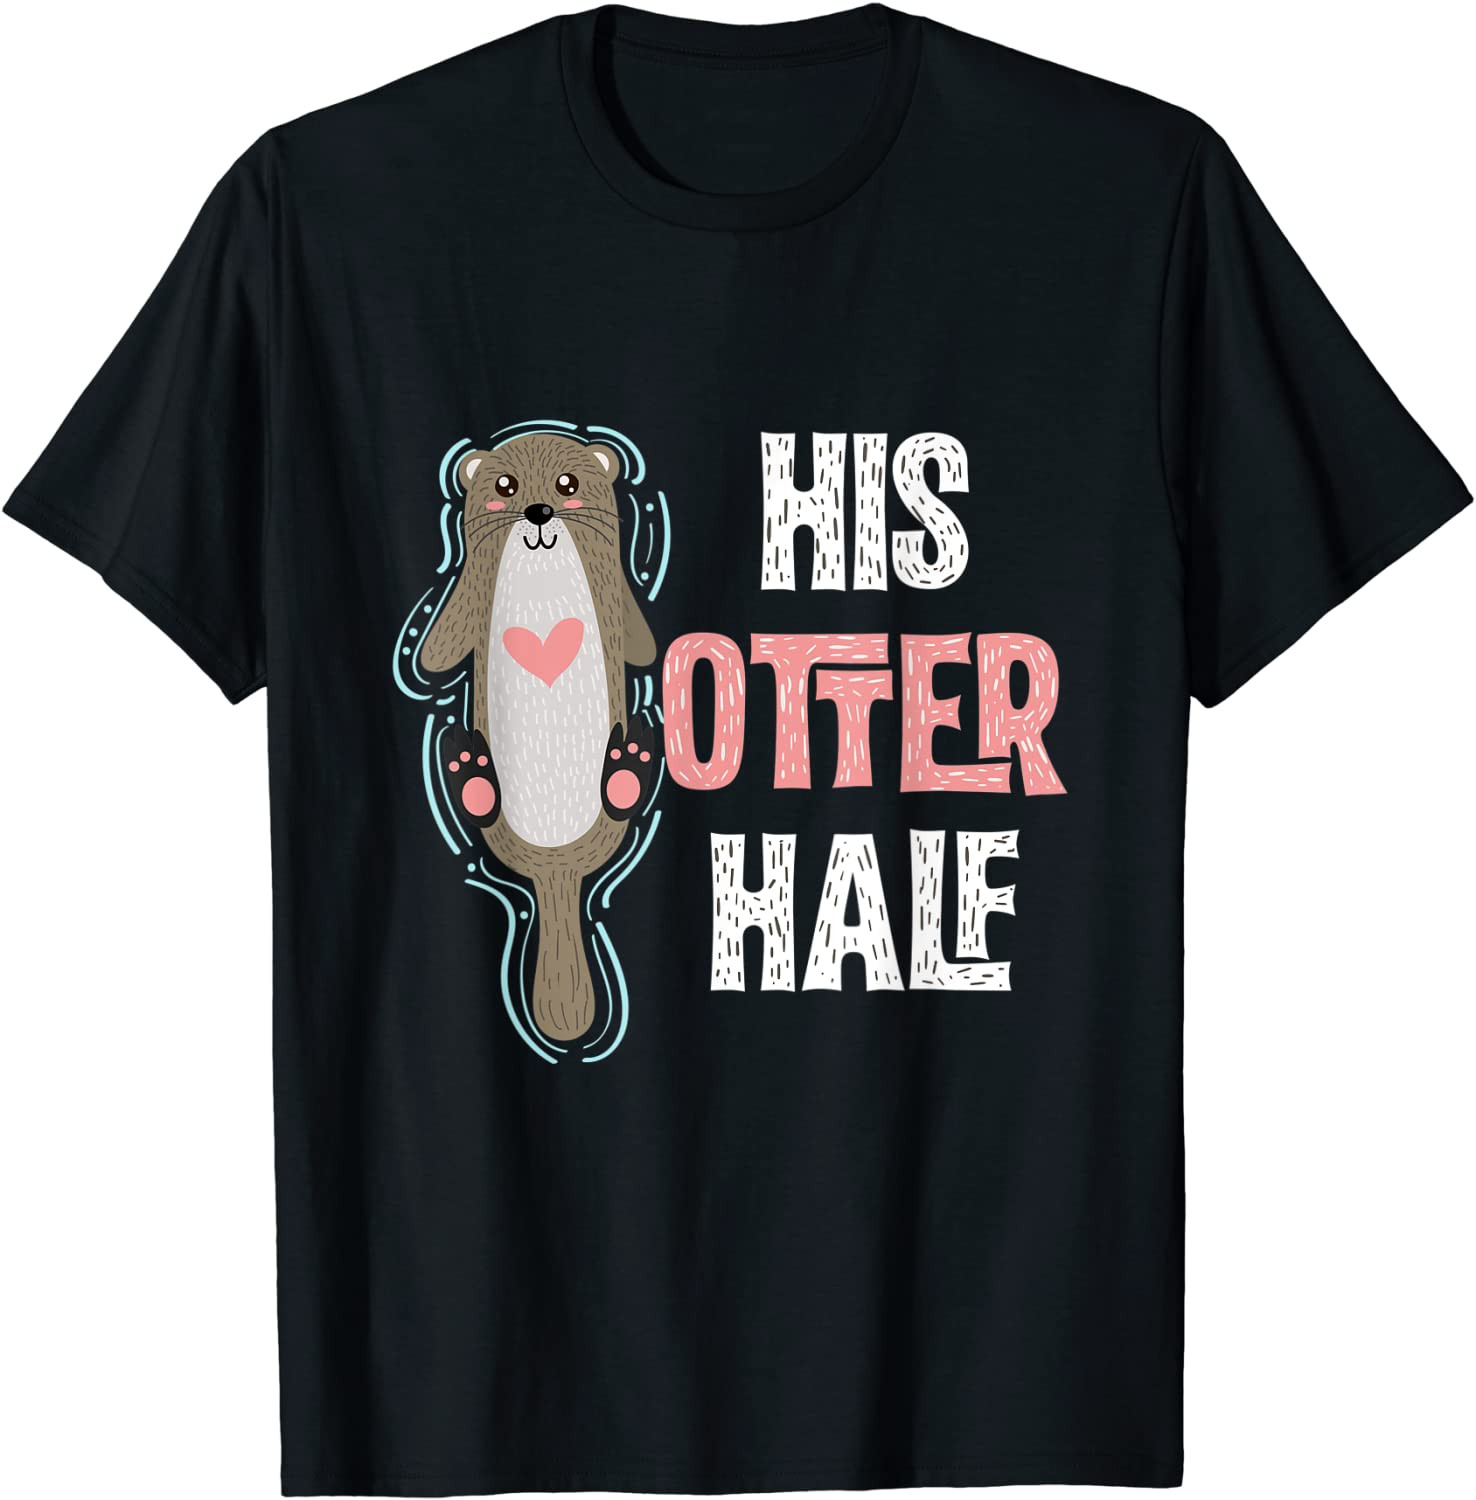 His Otter Half Punny Romantic Couple Valentine's Day T T-Shirt